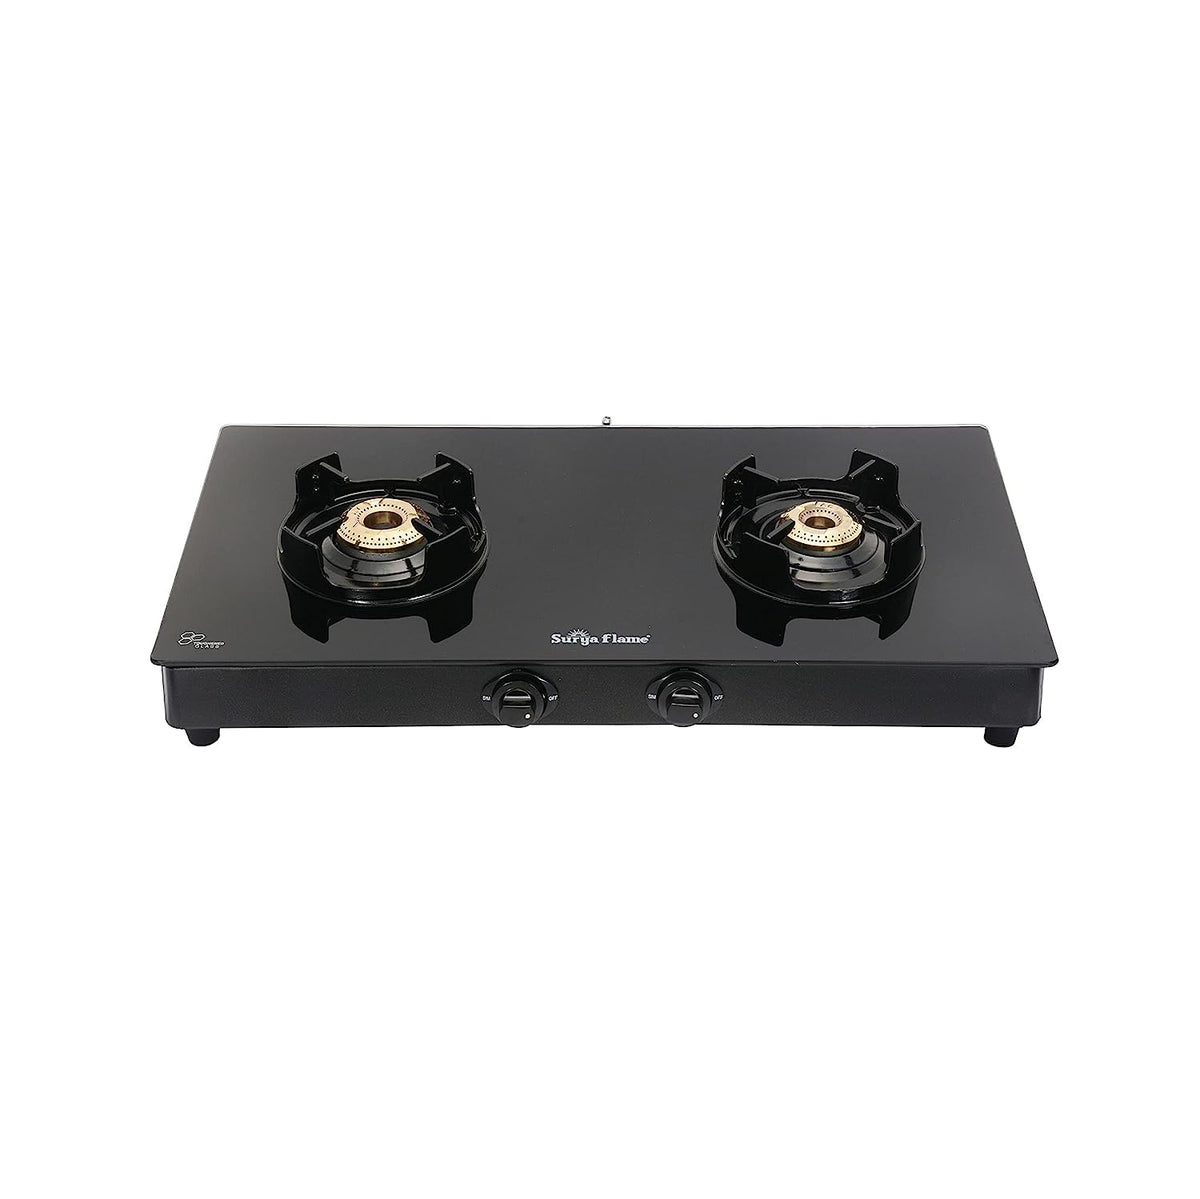 Surya Flame Black Beauty Gas Stove Glass Top | LPG Stove with Flame Protection Pan Support | Anti Skid Legs | 2 Years Complete Doorstep Warranty - Black (2 Burner, 2)